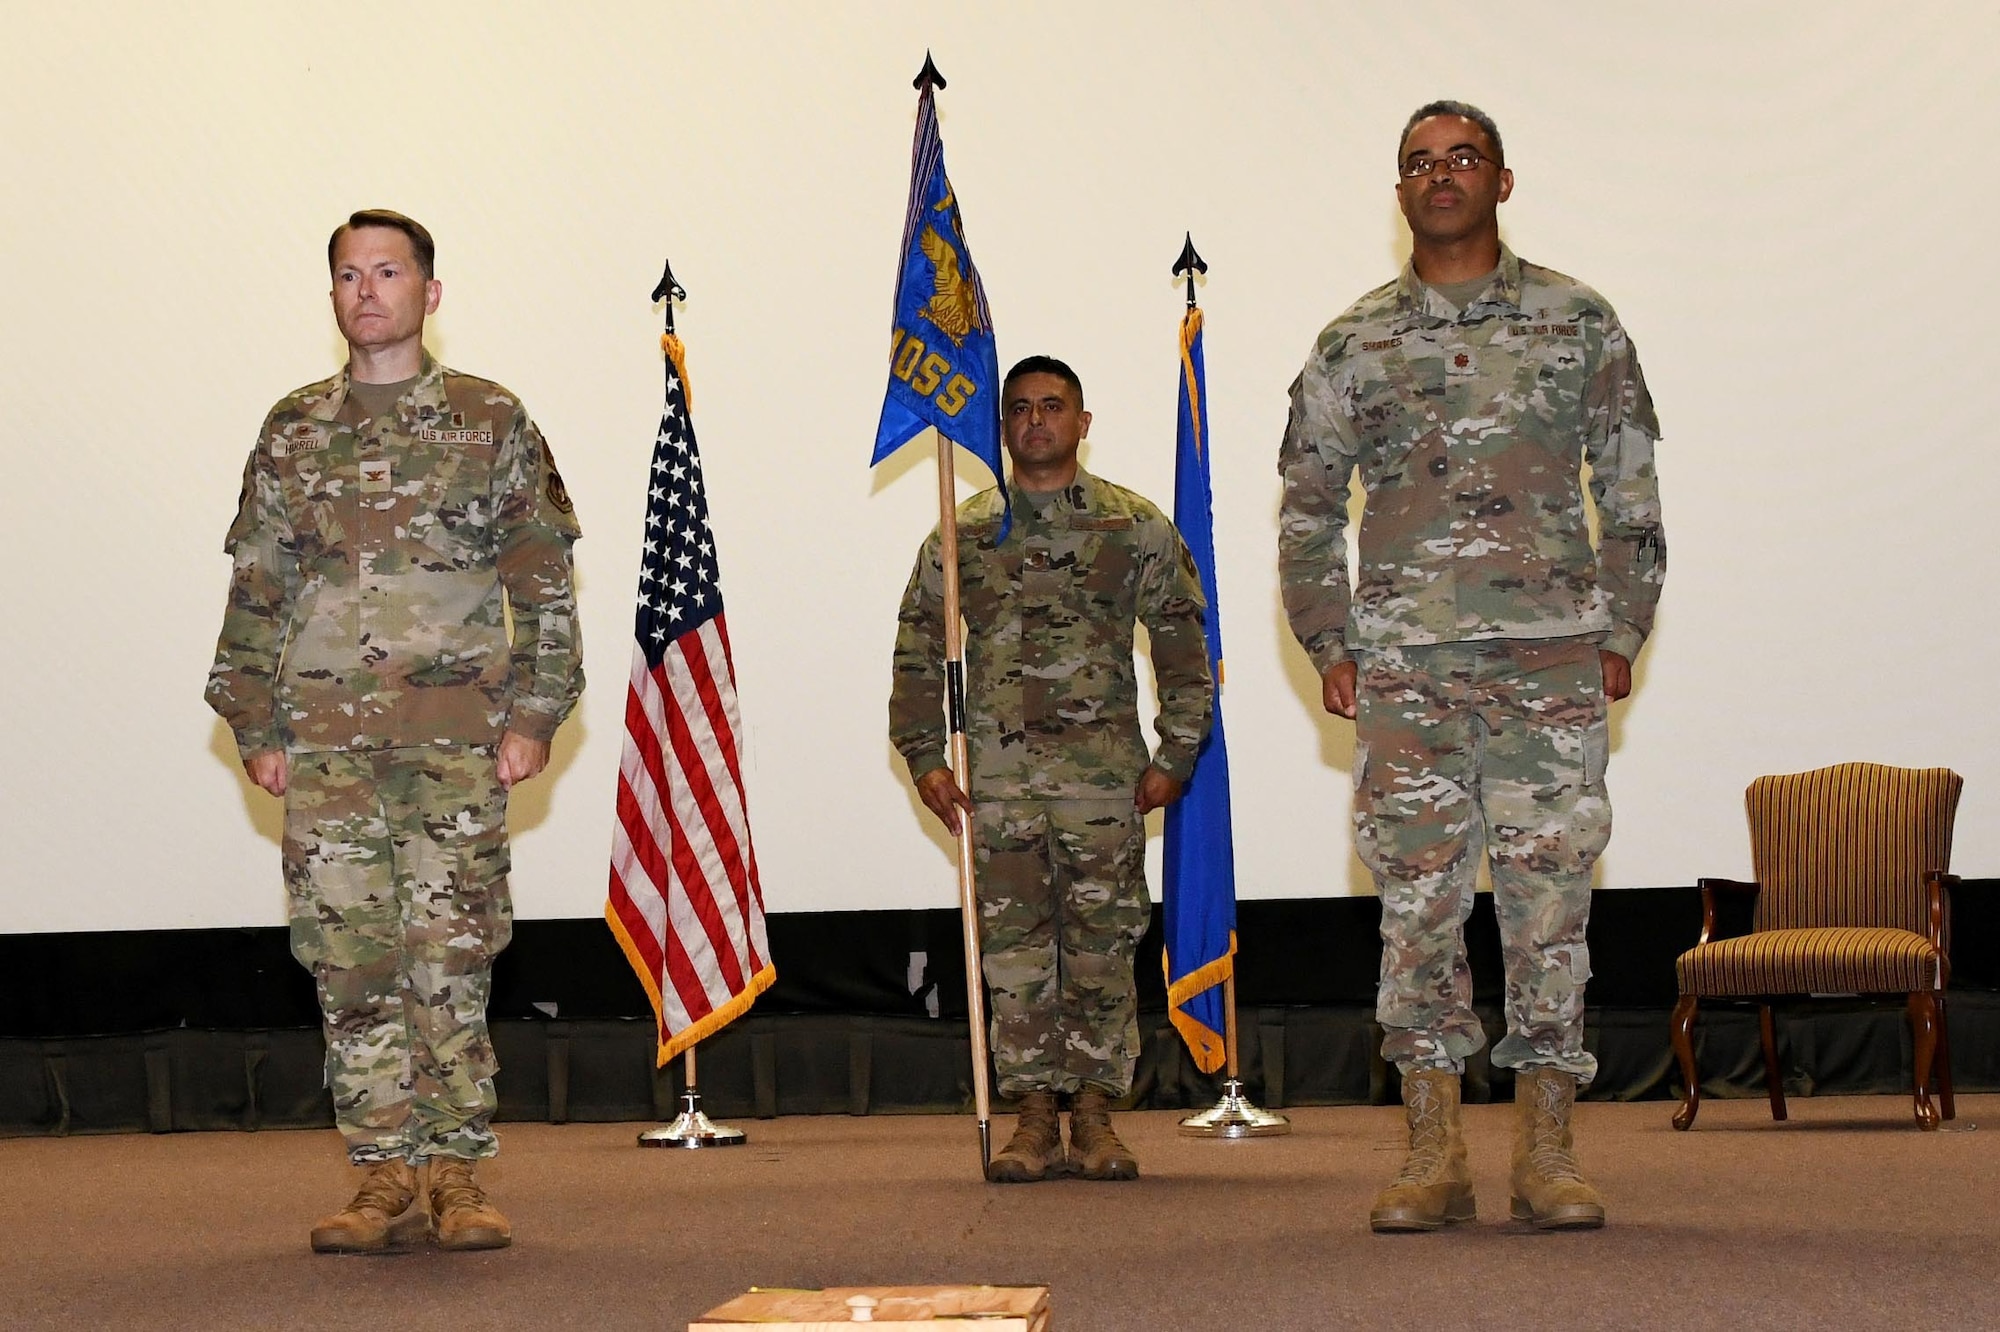 Photo shows three Airmen standing at attention on the stage while presenting a guidon.